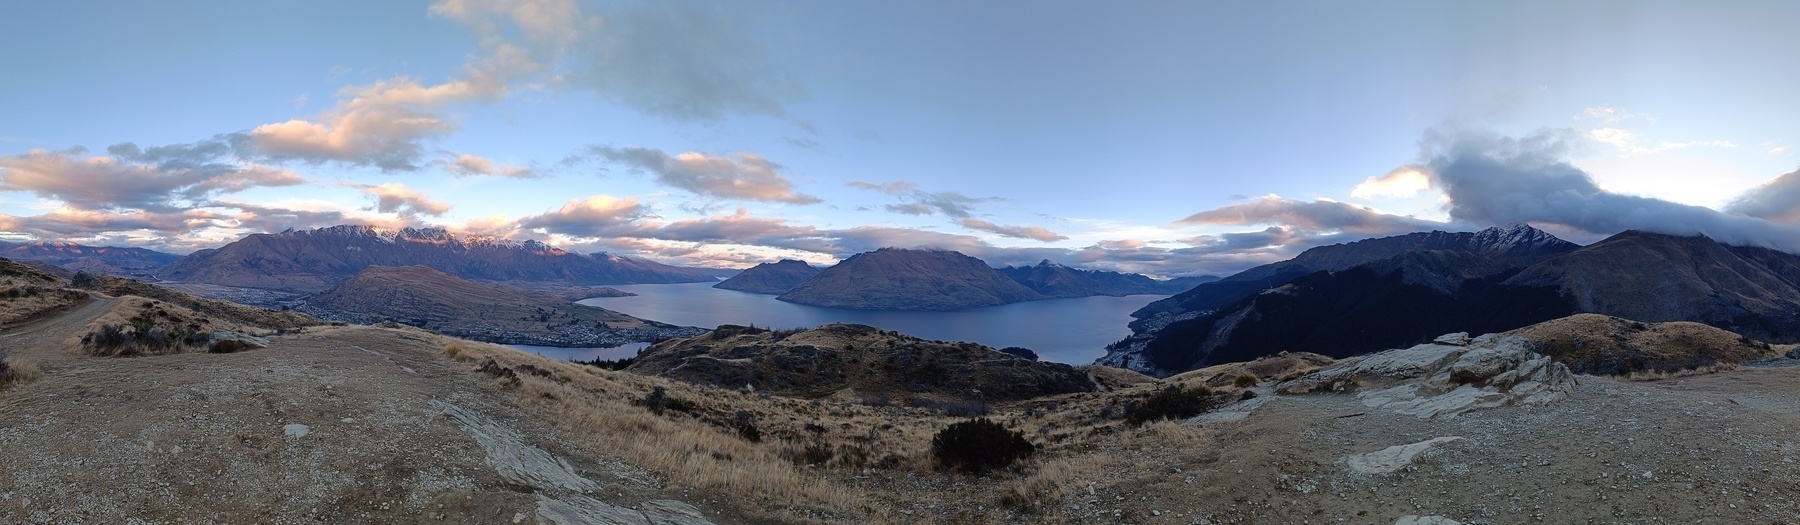 Panorama view of Lake Wakatipu. Remarkables to the east, Cecil Peak to the south and centre straight across the lake and Ben Lomond to the west.